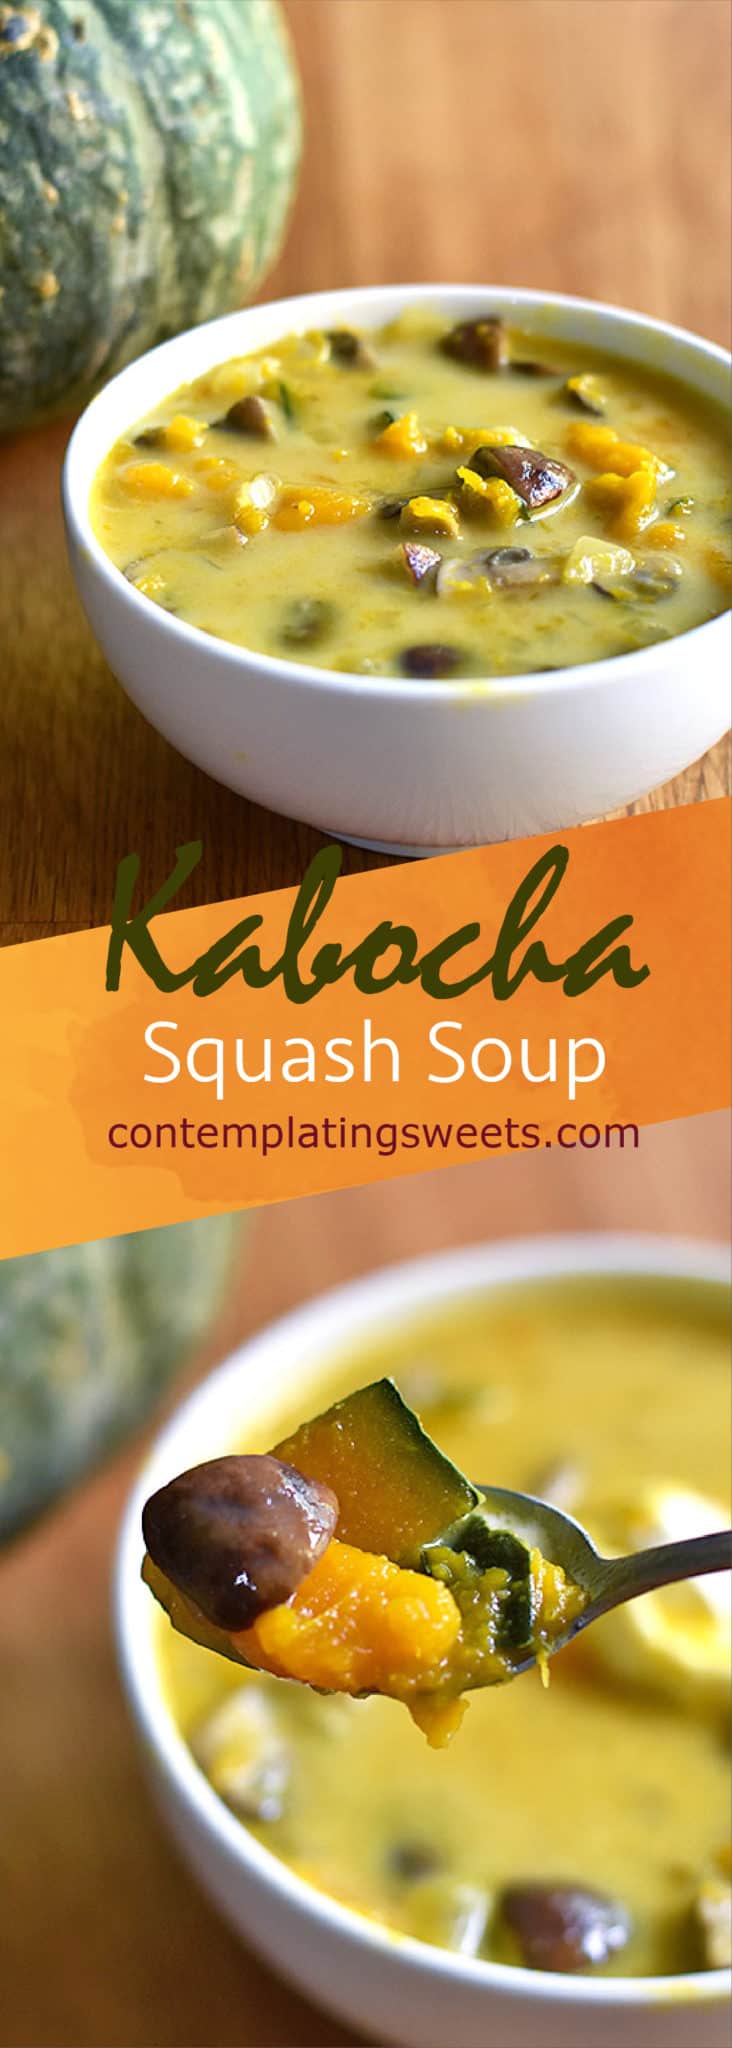 This kabocha squash soup is naturally sweet, and uses just a few simple ingredients to make a comforting and delicious winter soup. 